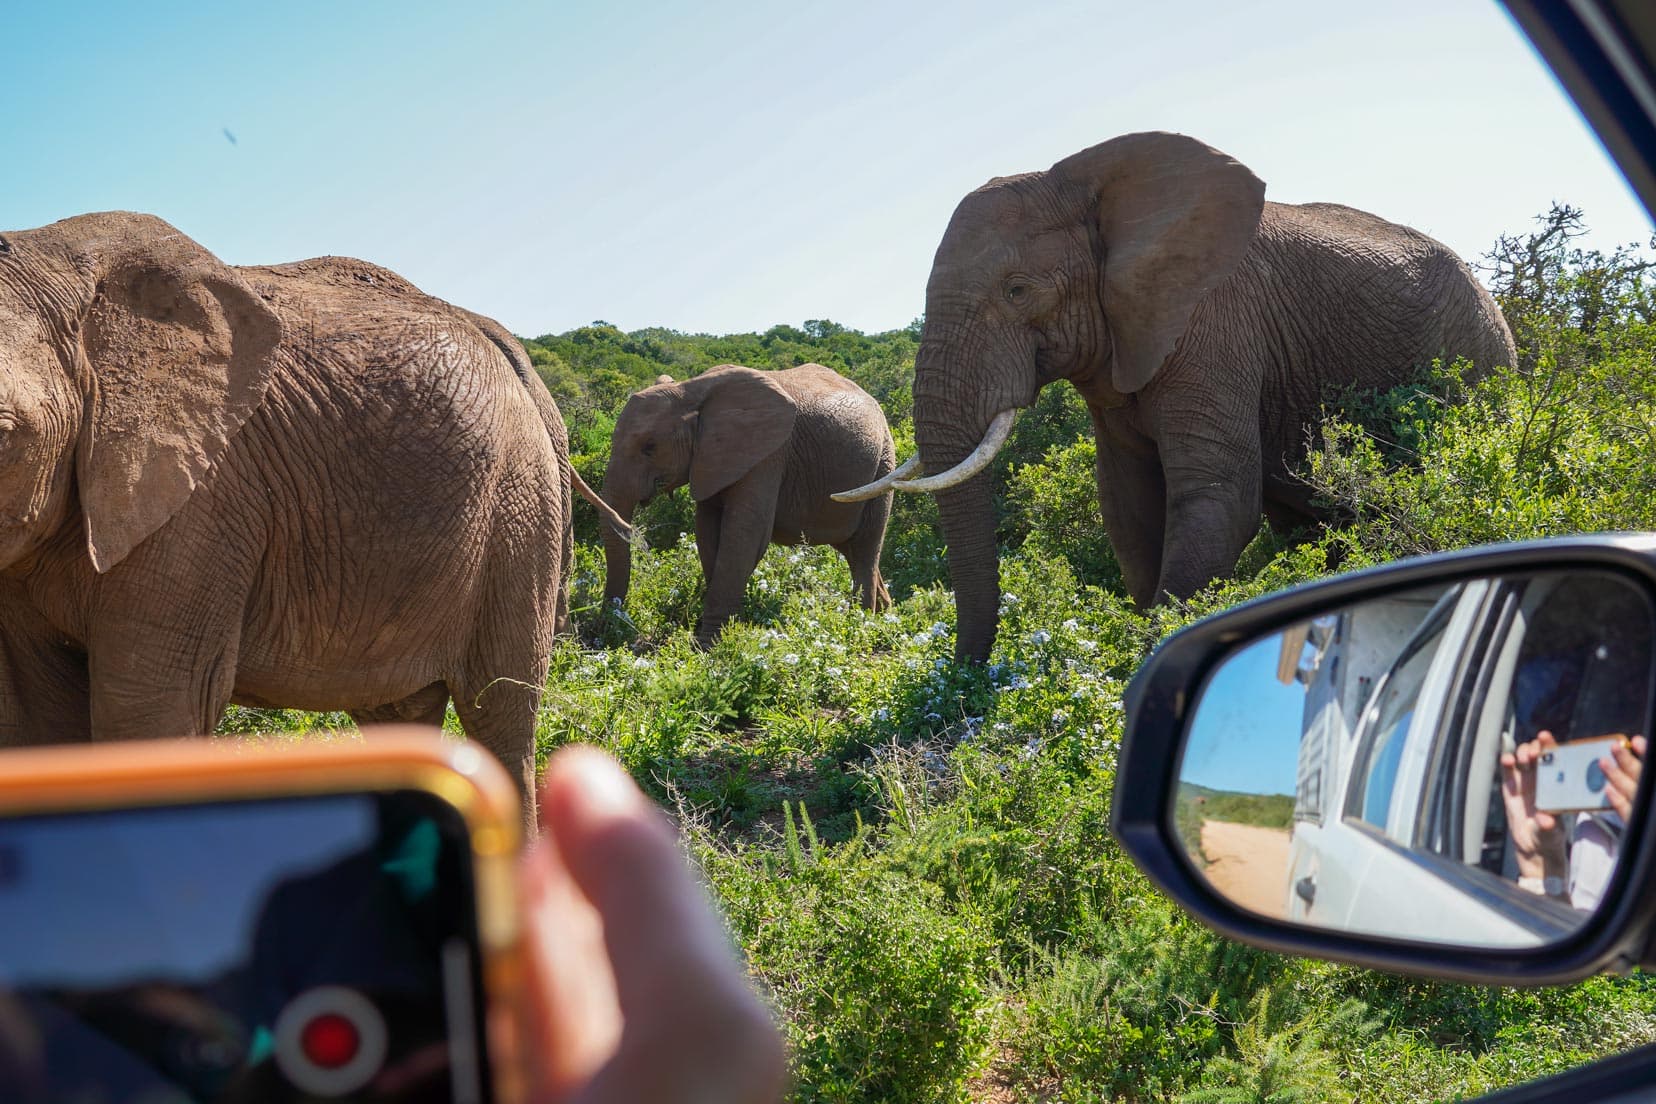 Elephants walking past car with a hand holding a mobile phone at the car window taking photos